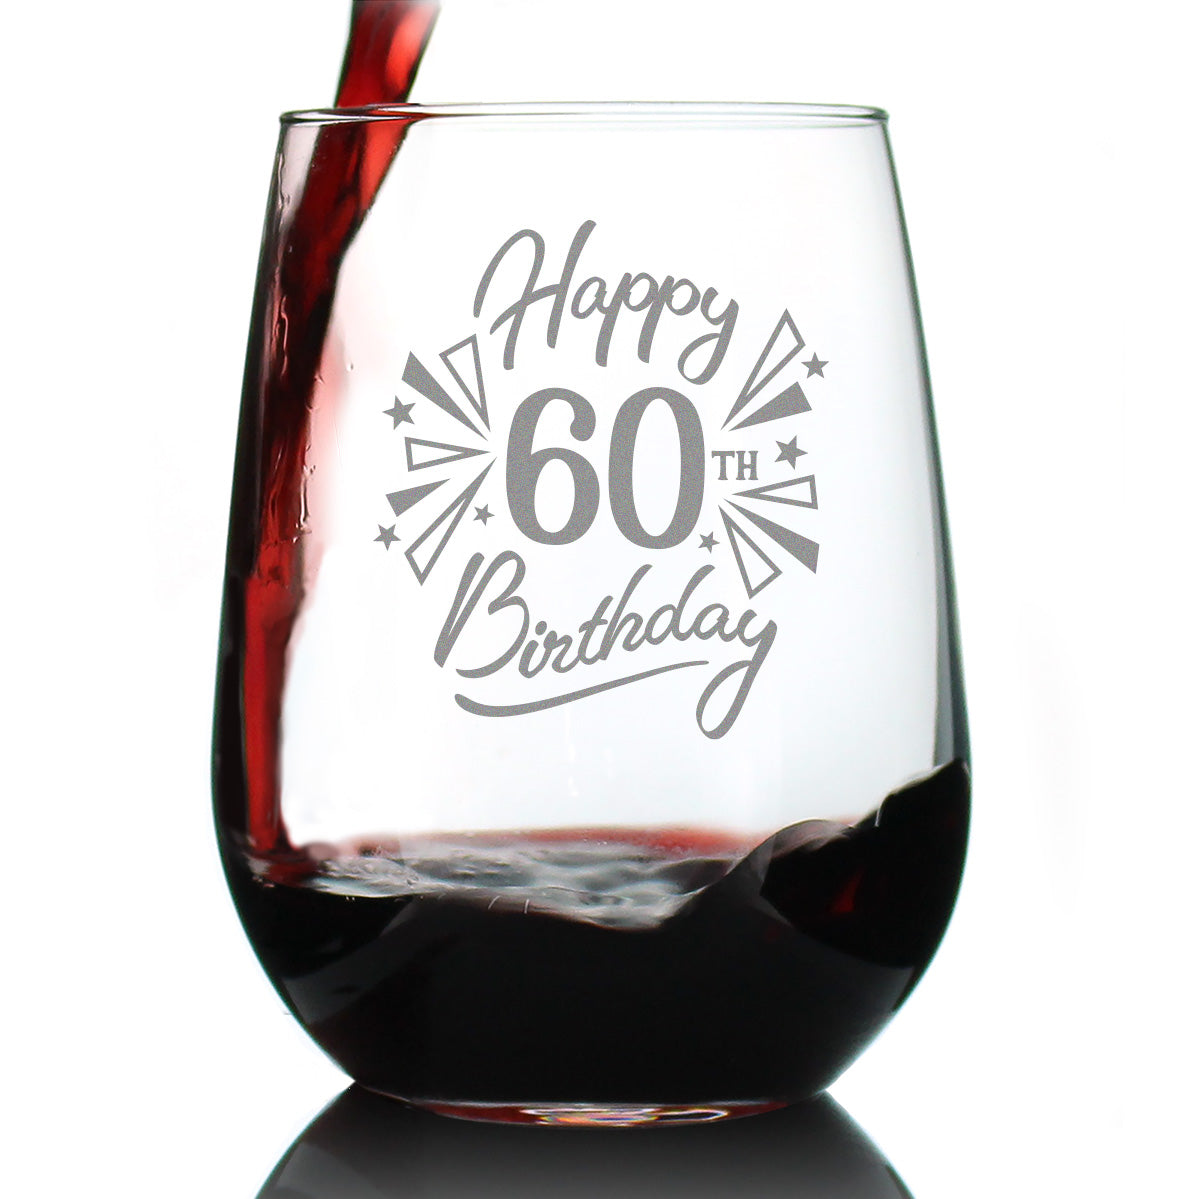 Happy 60th Birthday - Stemless Wine Glass Gifts for Women &amp; Men Turning 60 - Bday Party Decor - Large Glasses 17 Oz